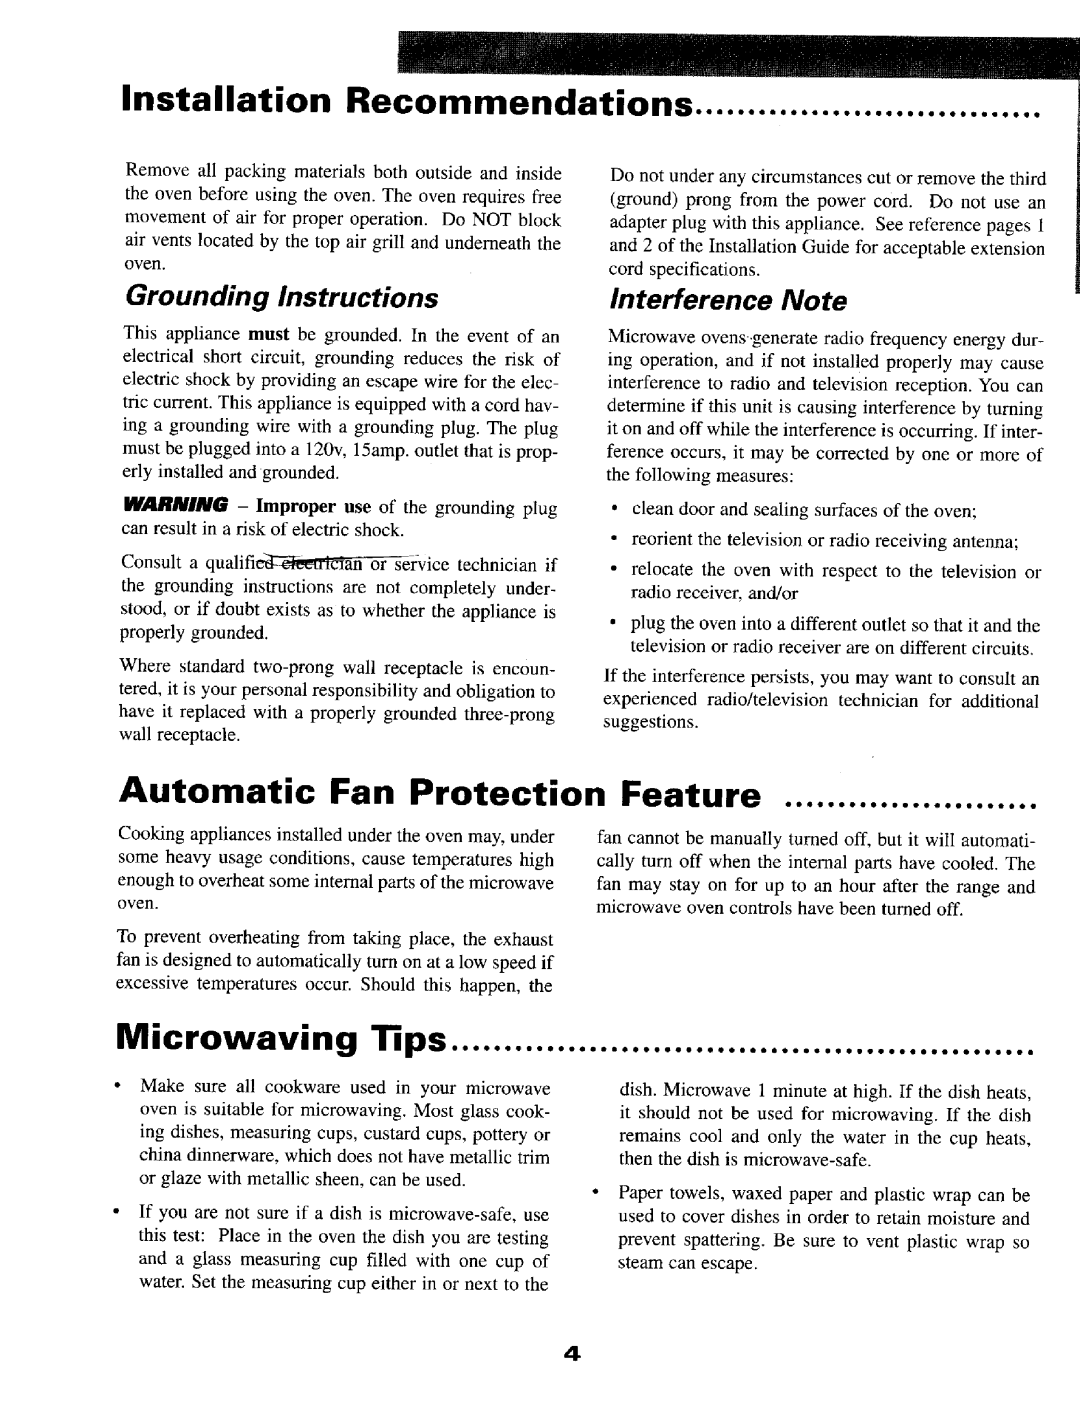 Maytag MMV5OOOB Installation Recommendations, Automatic Fan Protection Feature, Grounding Instructions, Interference Note 